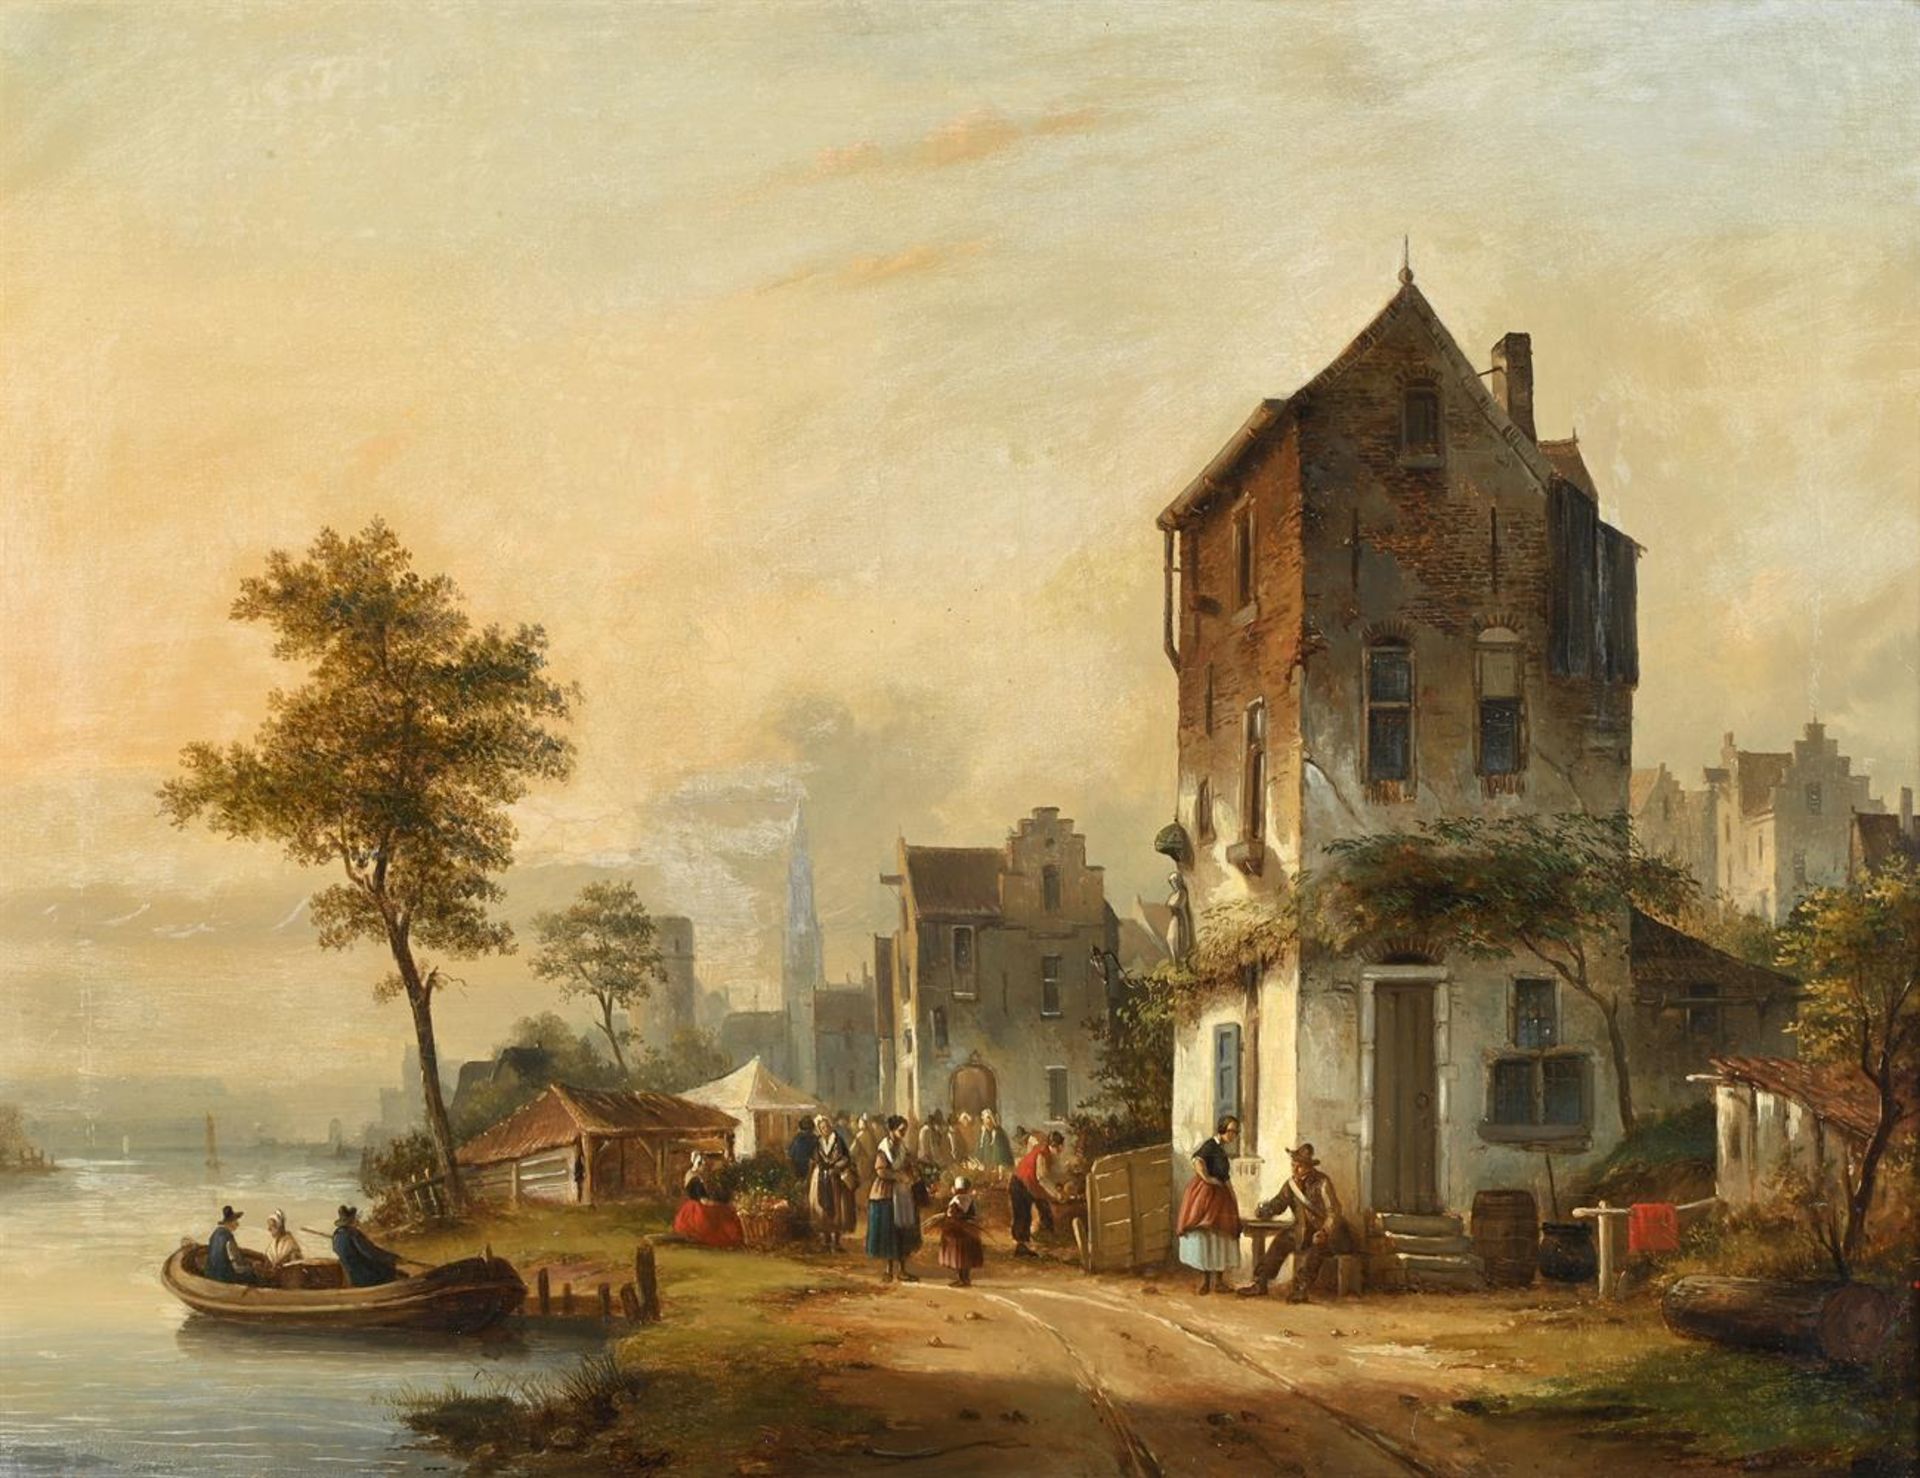 FOLLOWER OF ADRIANUS EVERSEN, VIEW OF A TOWN WITH FIGURES BY A RIVER